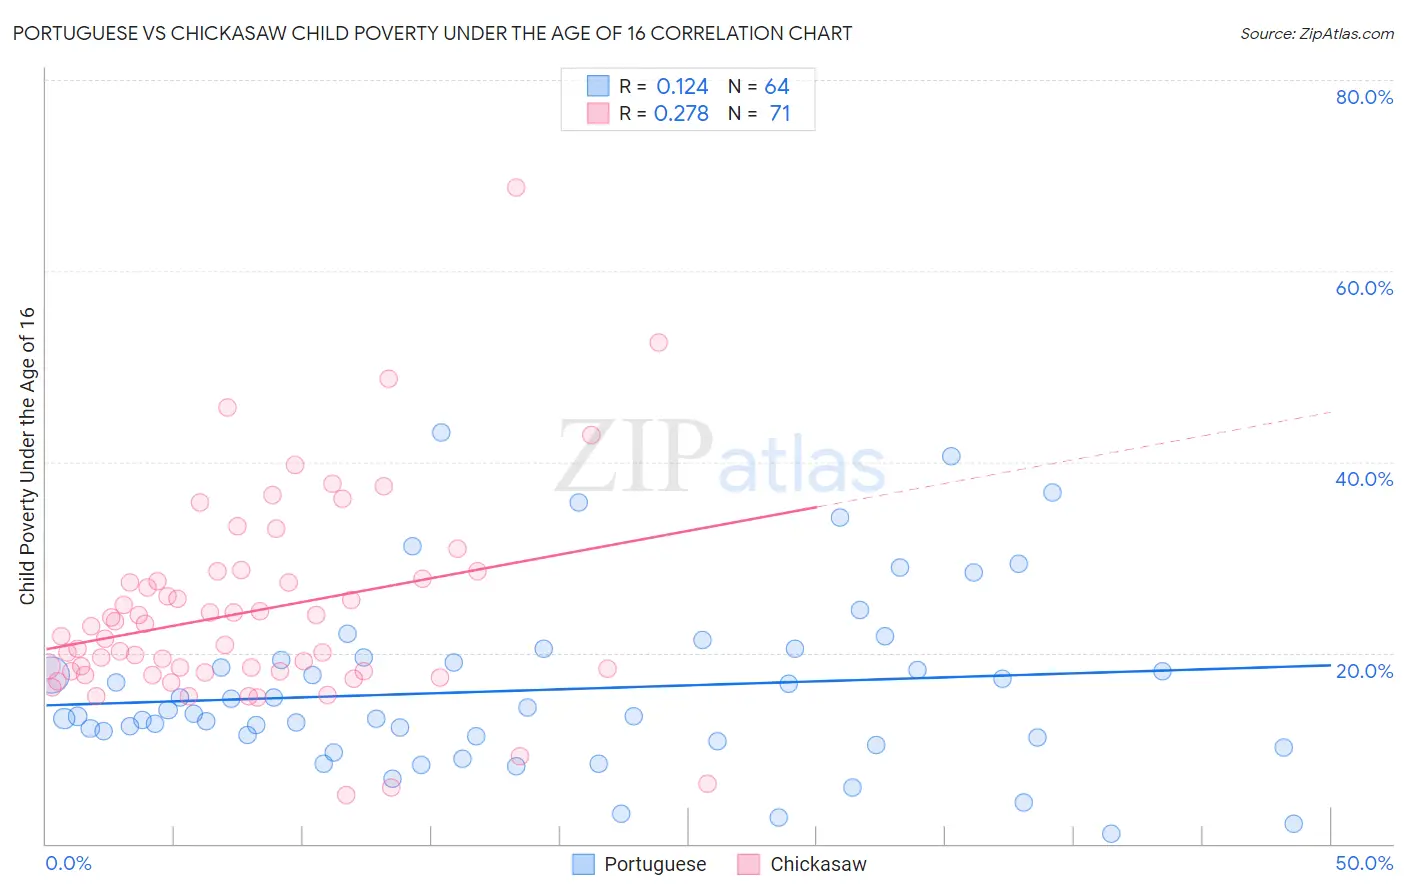 Portuguese vs Chickasaw Child Poverty Under the Age of 16